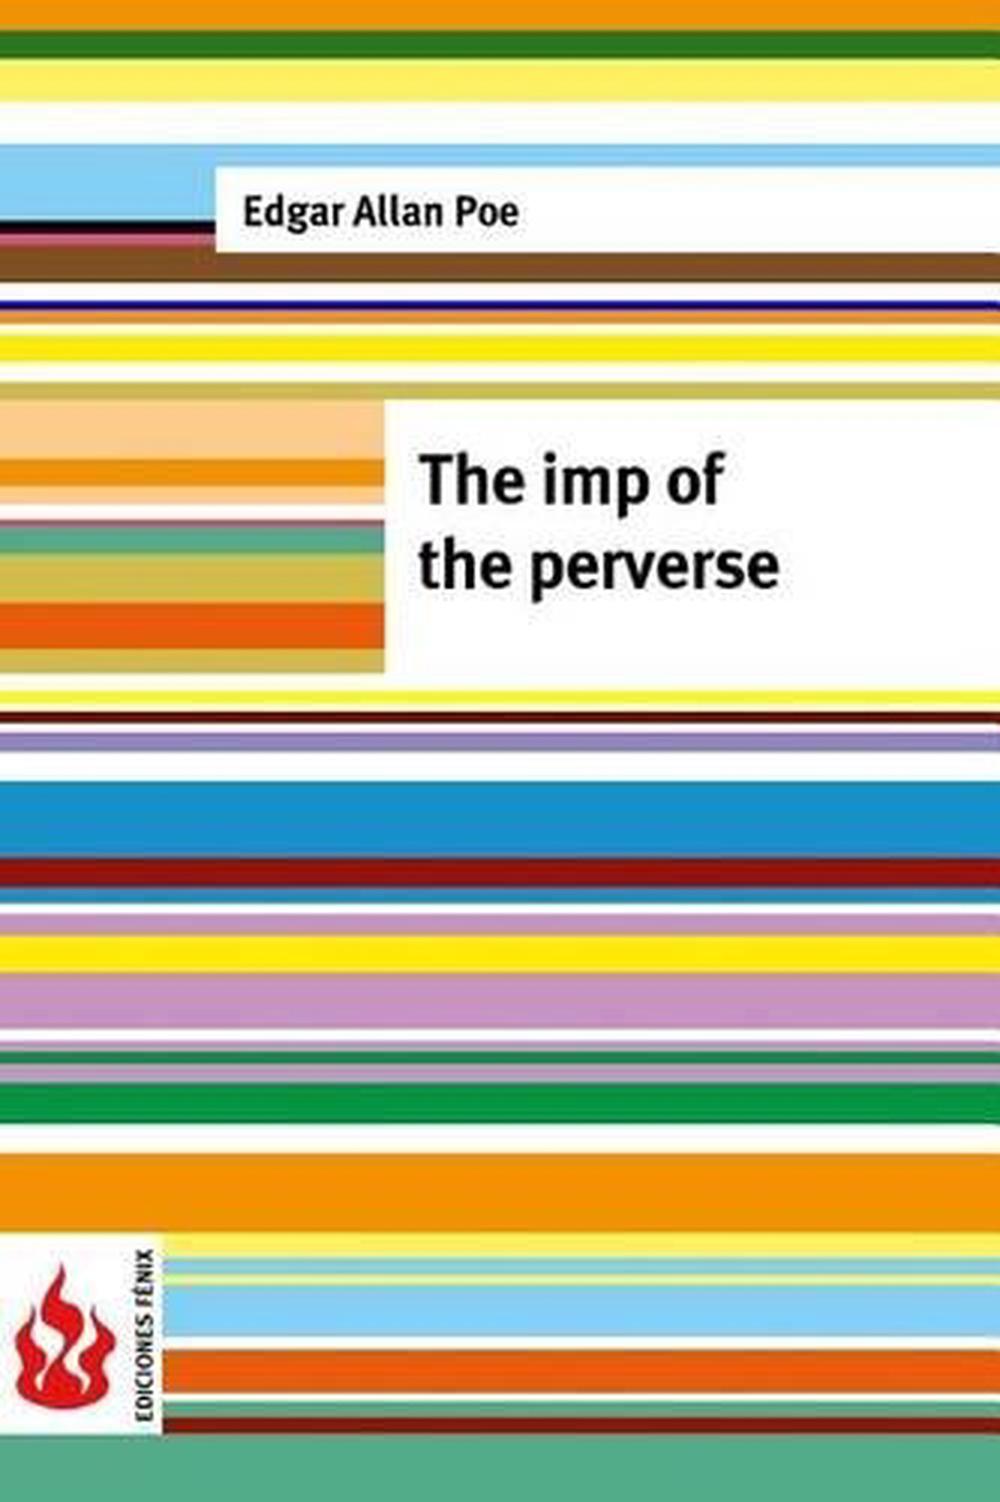 The Imp of the Perverse by Edgar Allan Poe